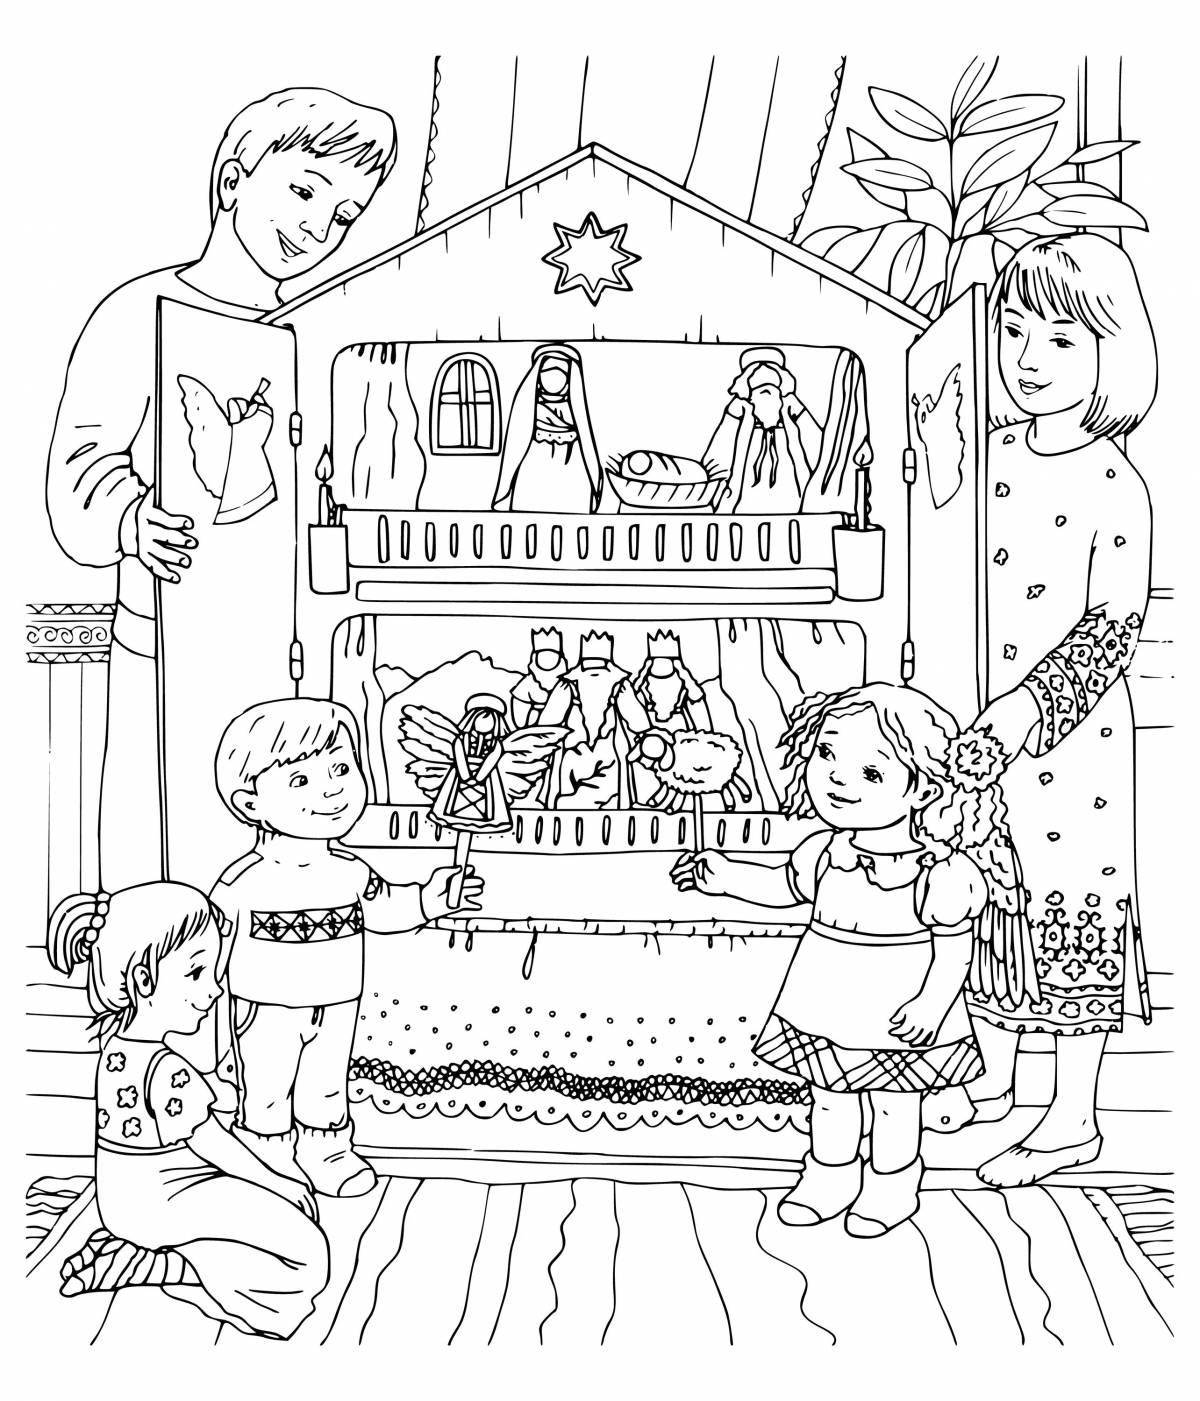 Glorious Christmas story coloring book